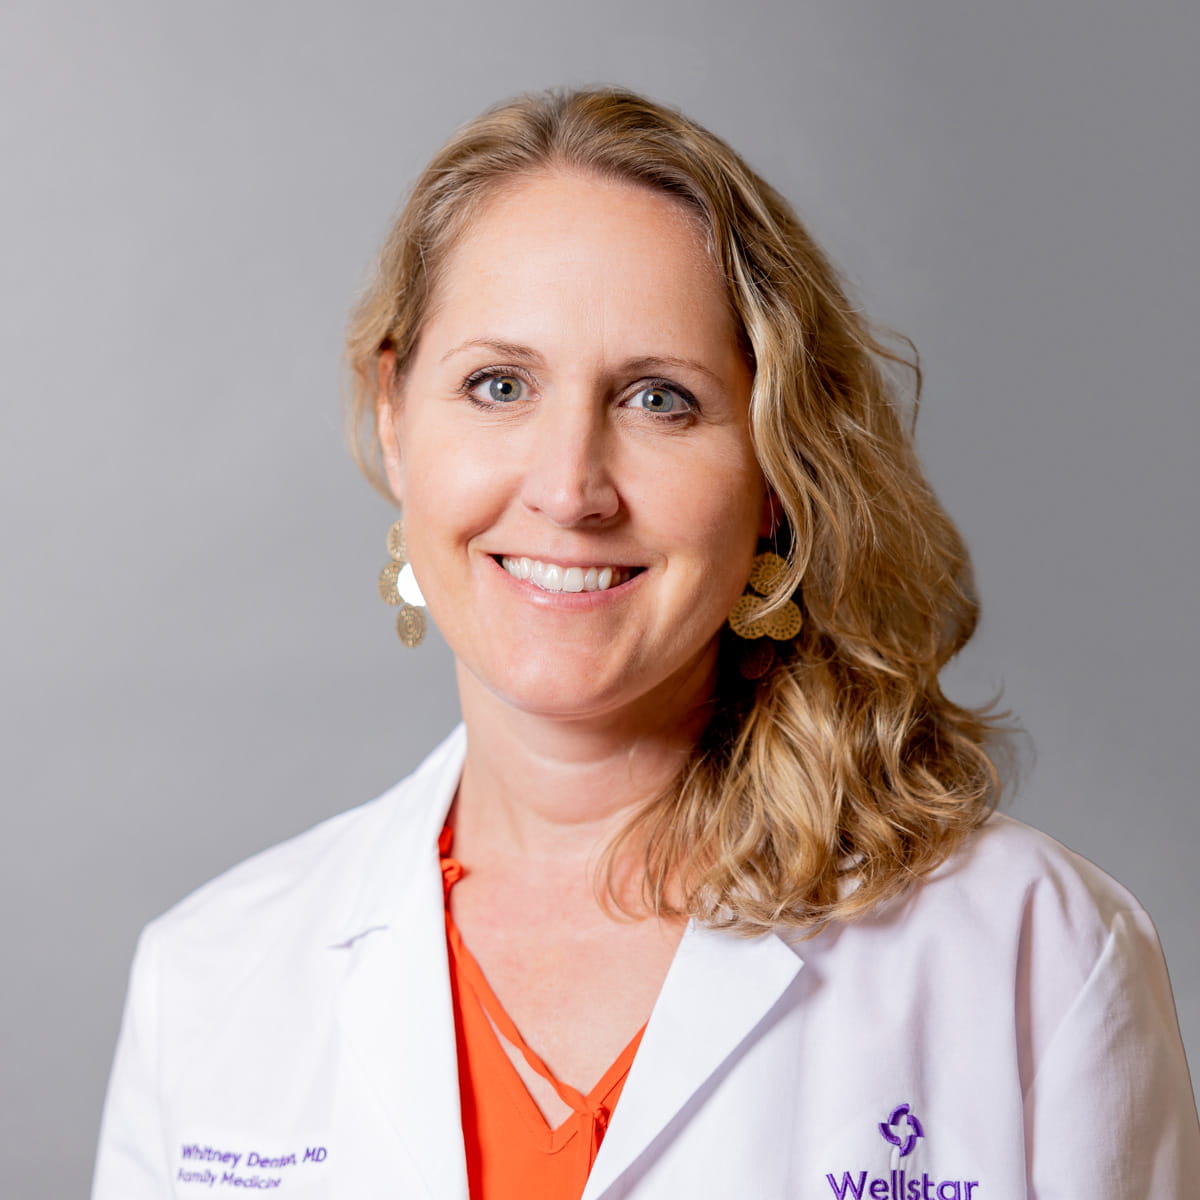 A friendly image of Whitney Denton MD